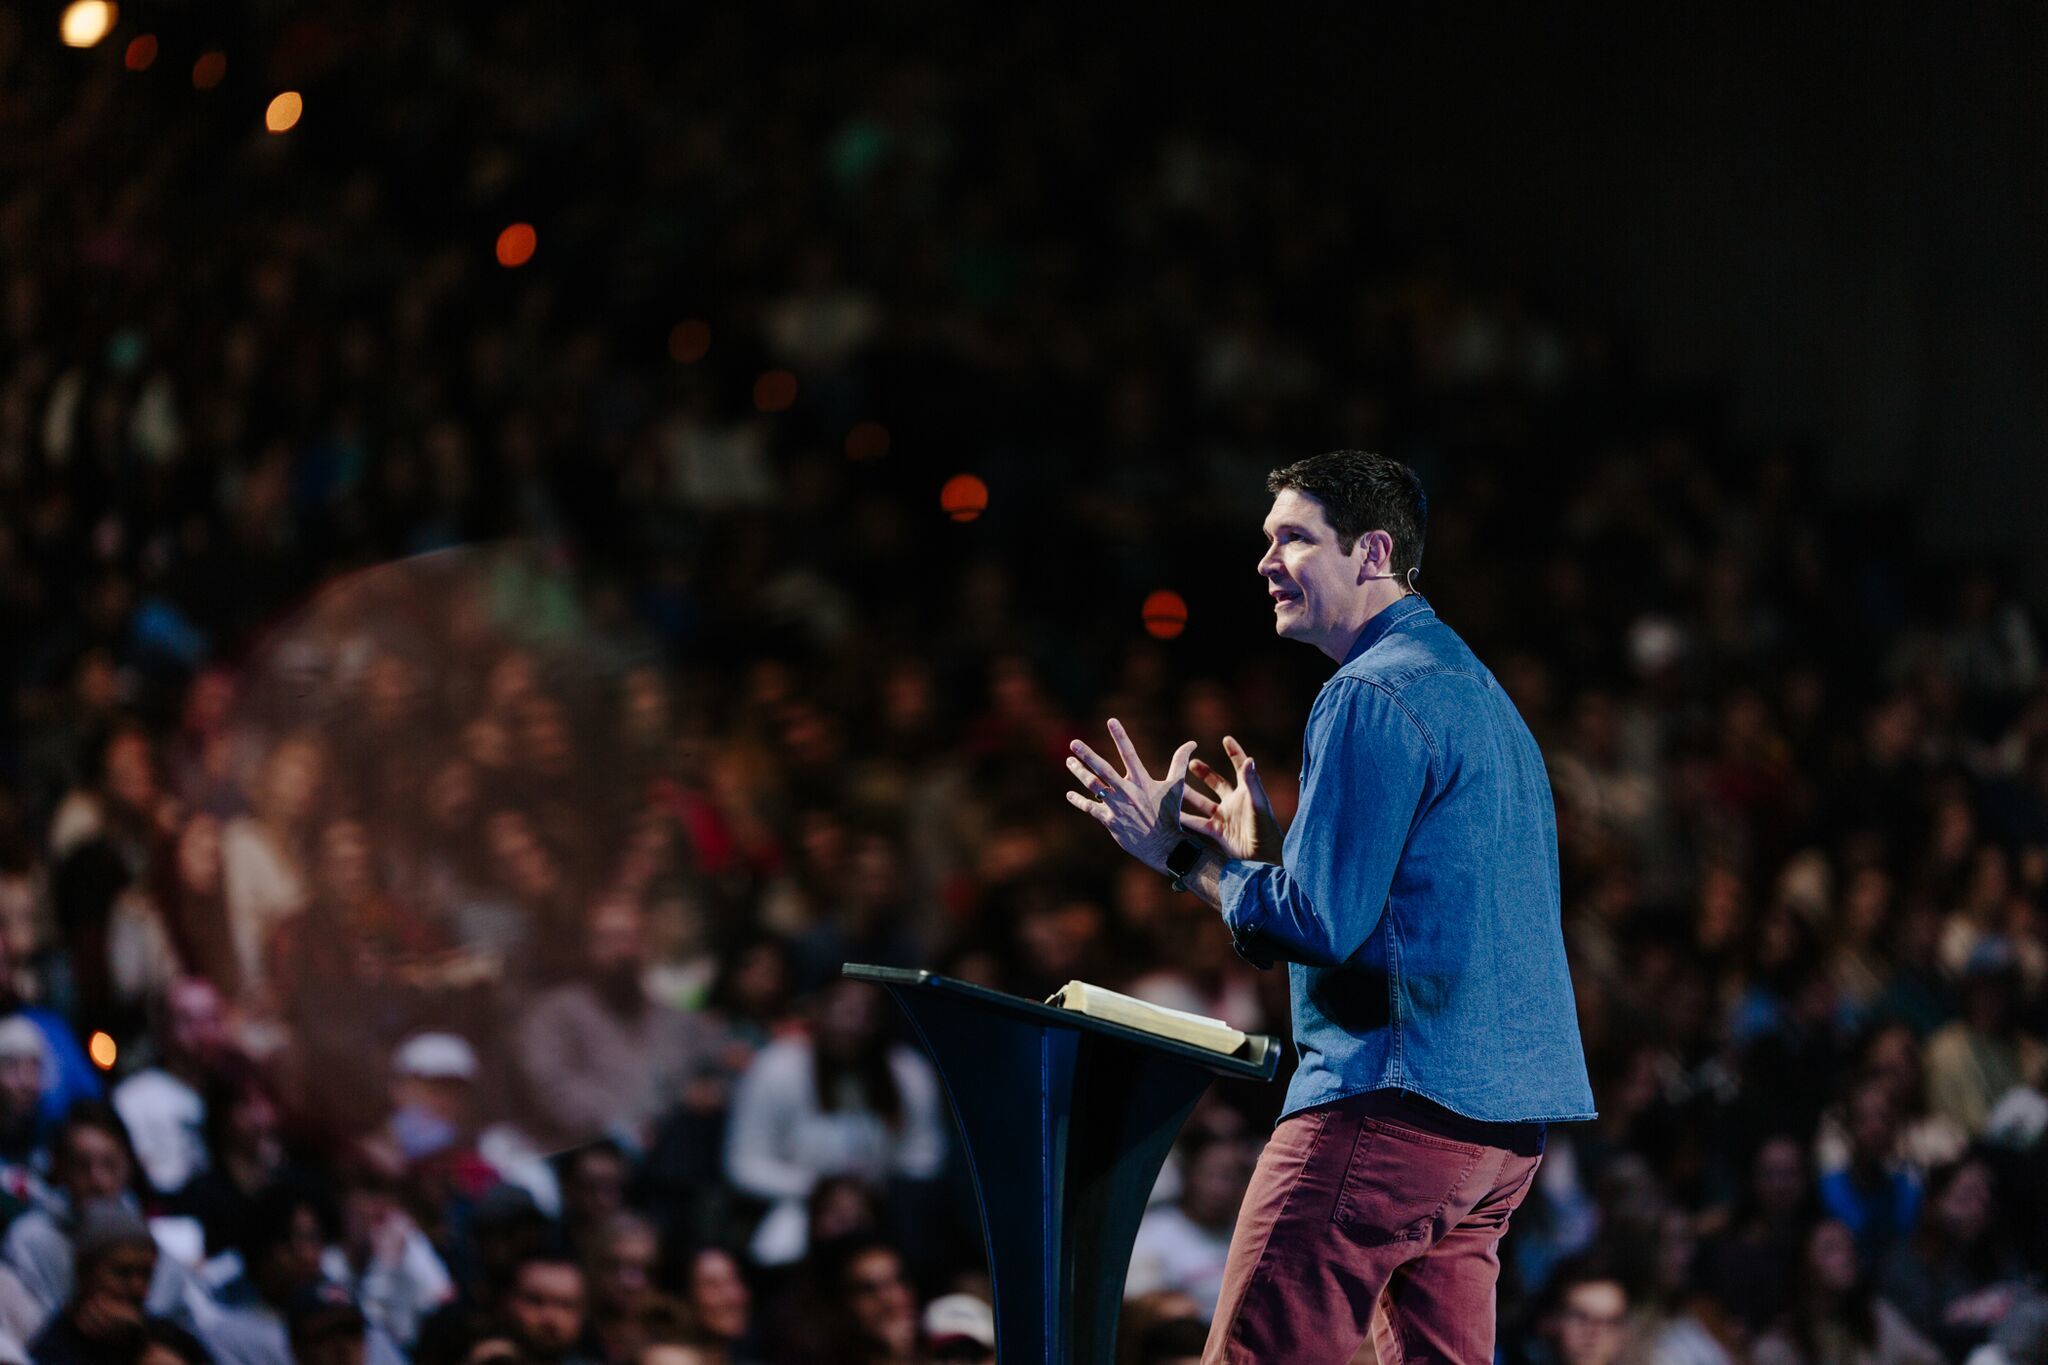 Megachurch Pastor Matt Chandler set to return from 3-month leave over inappropriate messages